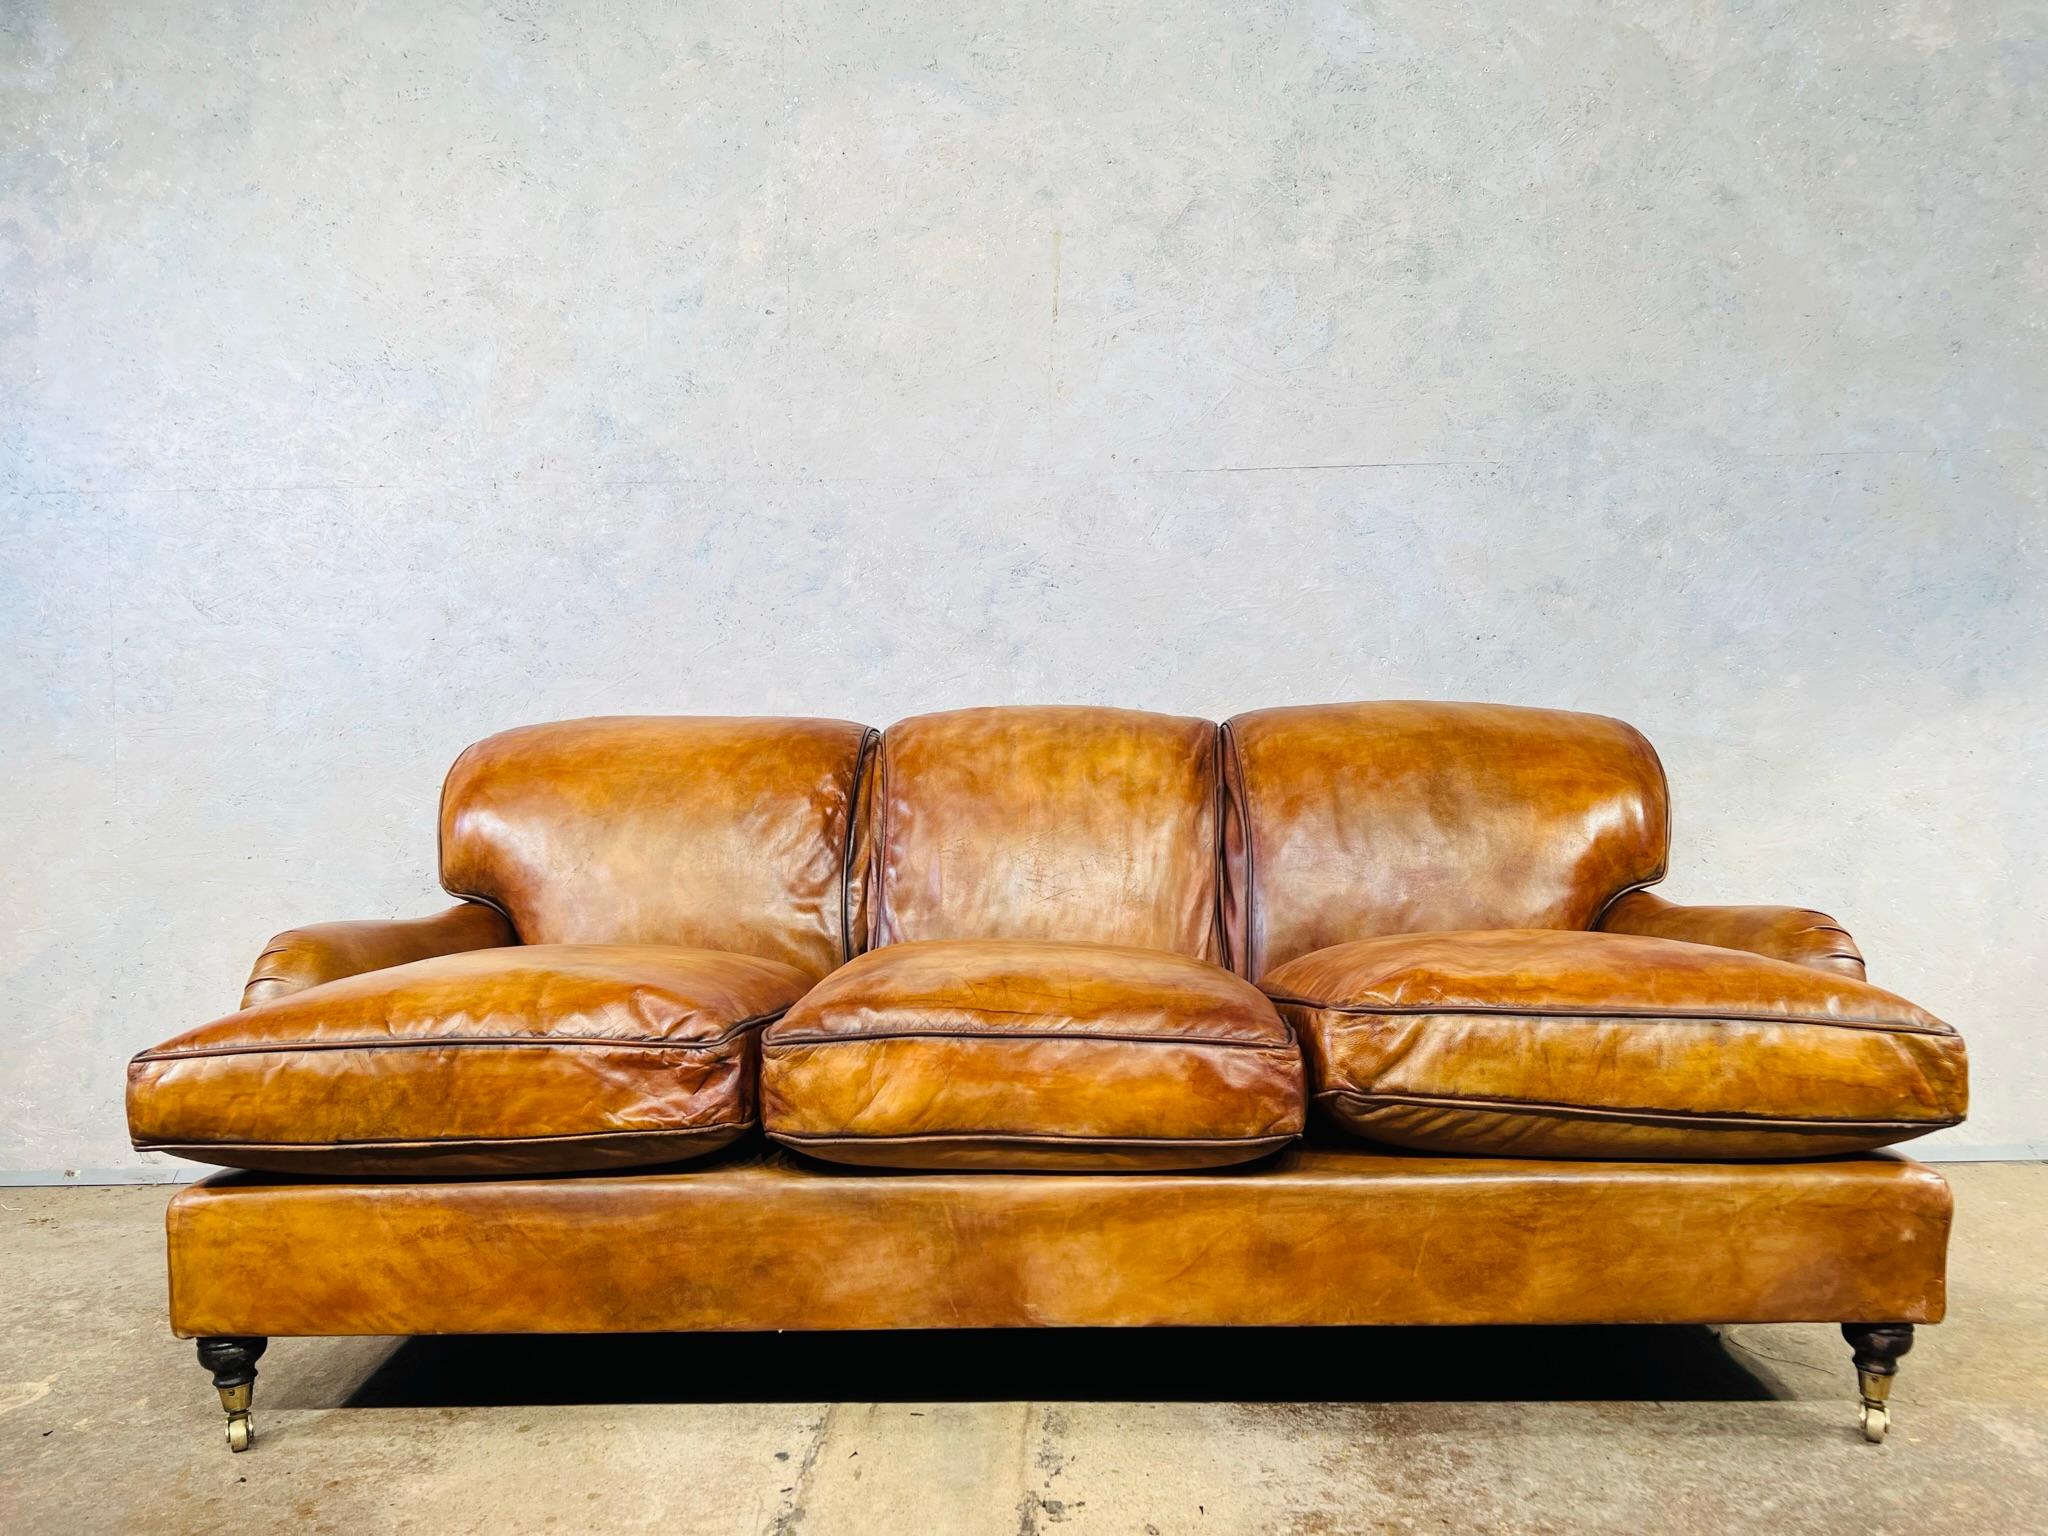 A stunning English made Mid Century Howard & Sons Three seater Leather sofa. A timeless classic, a great design it stands beautifully and is incredibly comfortable being deep seated with feather filled cushions.

An exceptional Hand dyed light tan